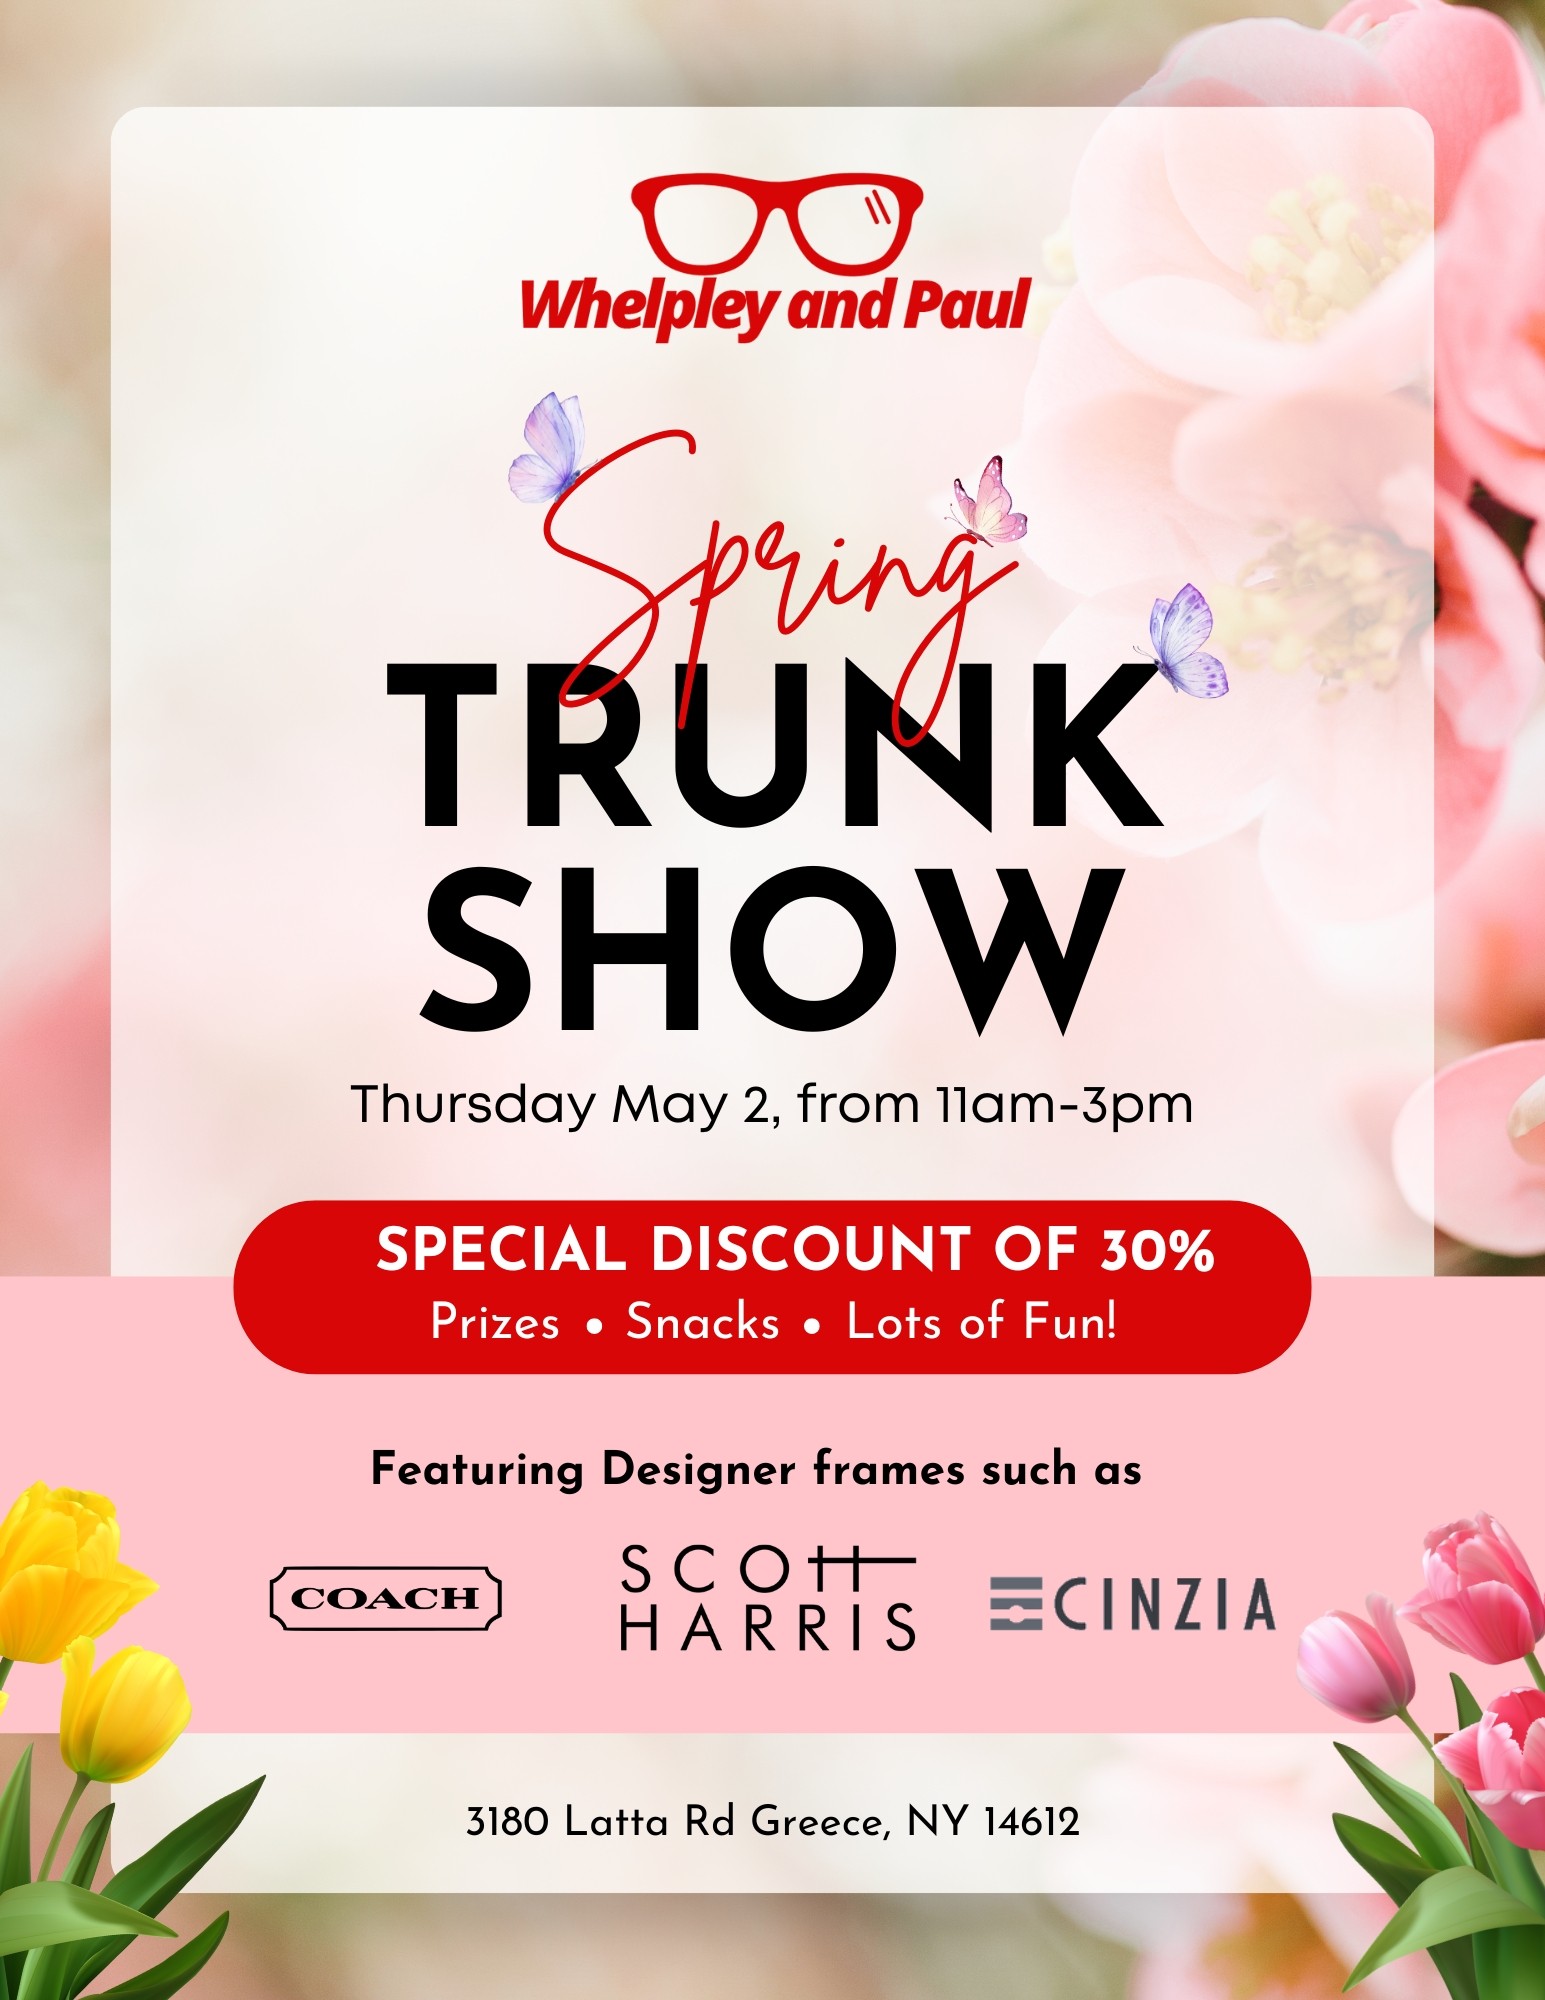 Whelpley and Paul Greece Spring Trunk Show